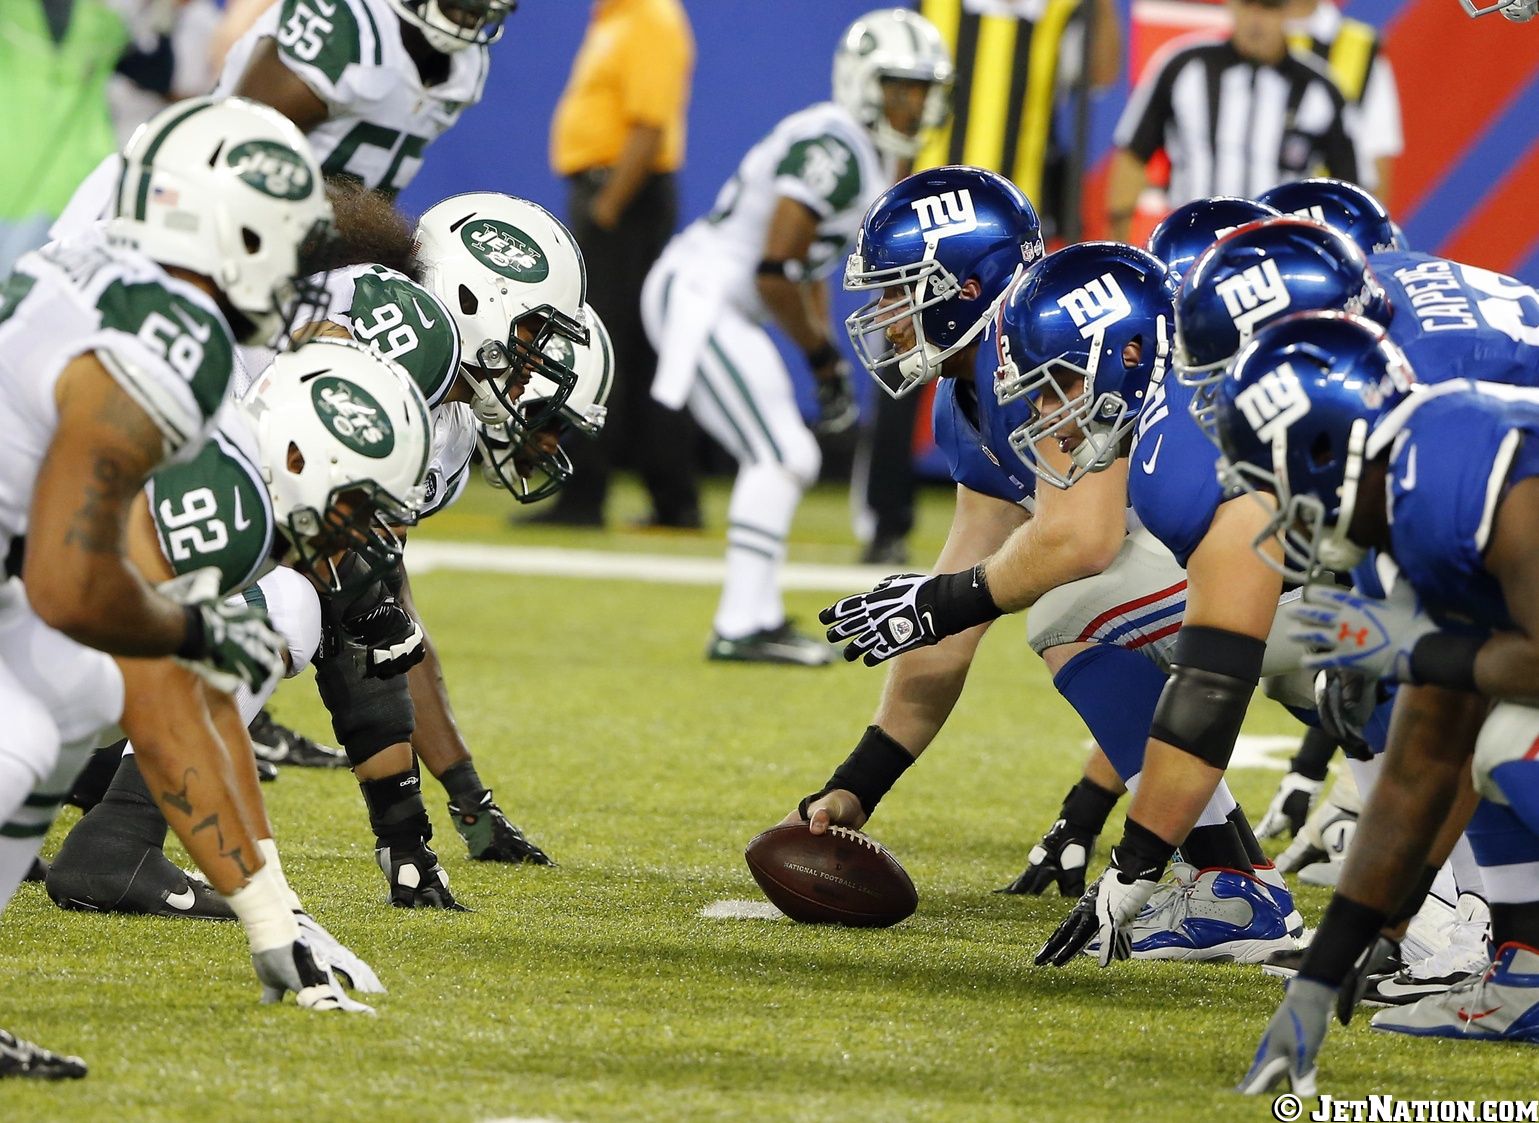 Jets Complete Comeback, Victorious Over Giants in OT, 23-20